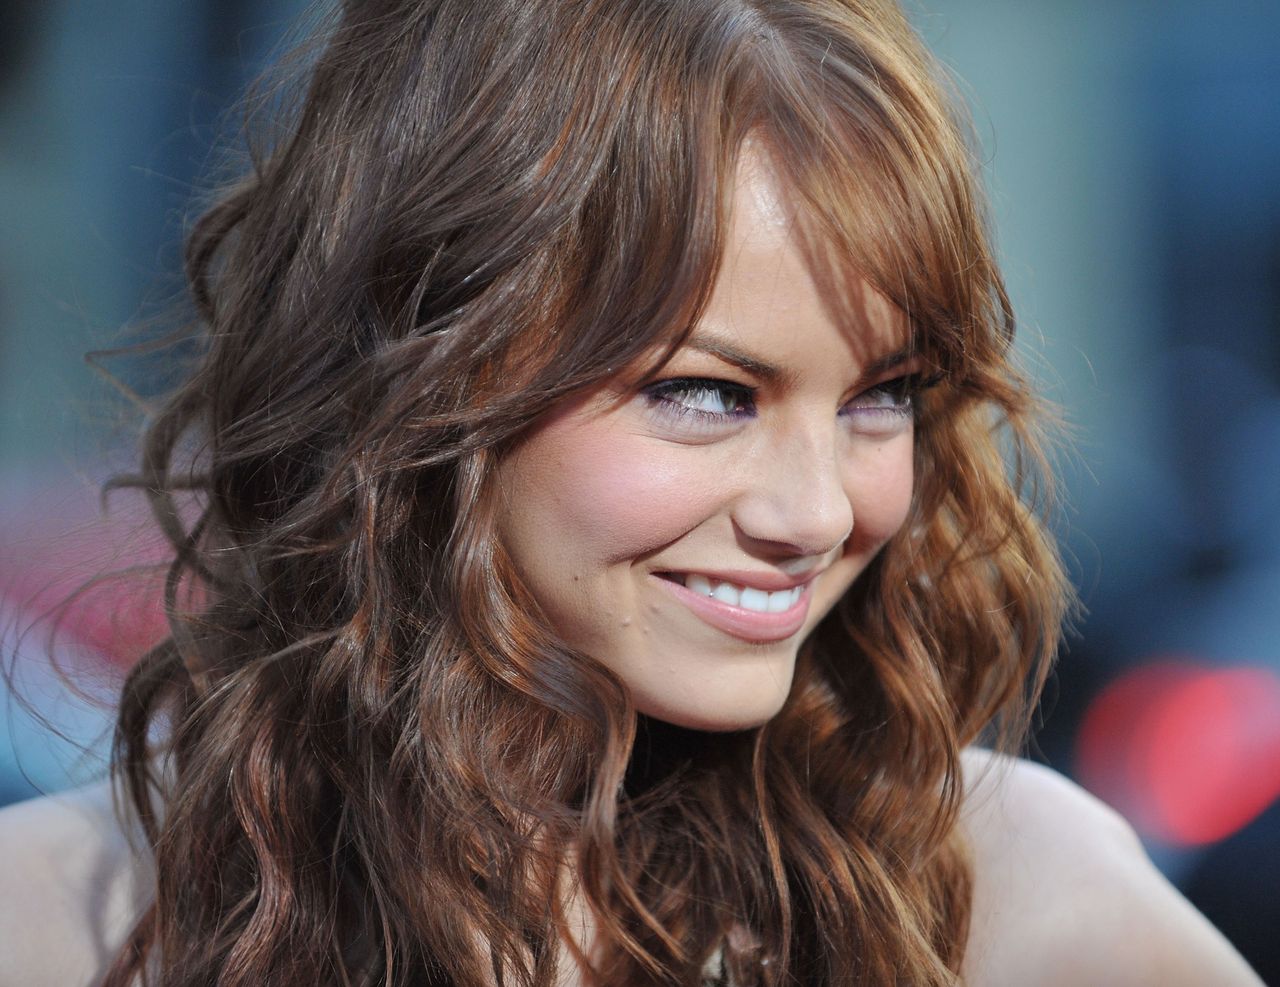 Emma Stone at the premiere of "Ghosts of my Exes" in 2009.